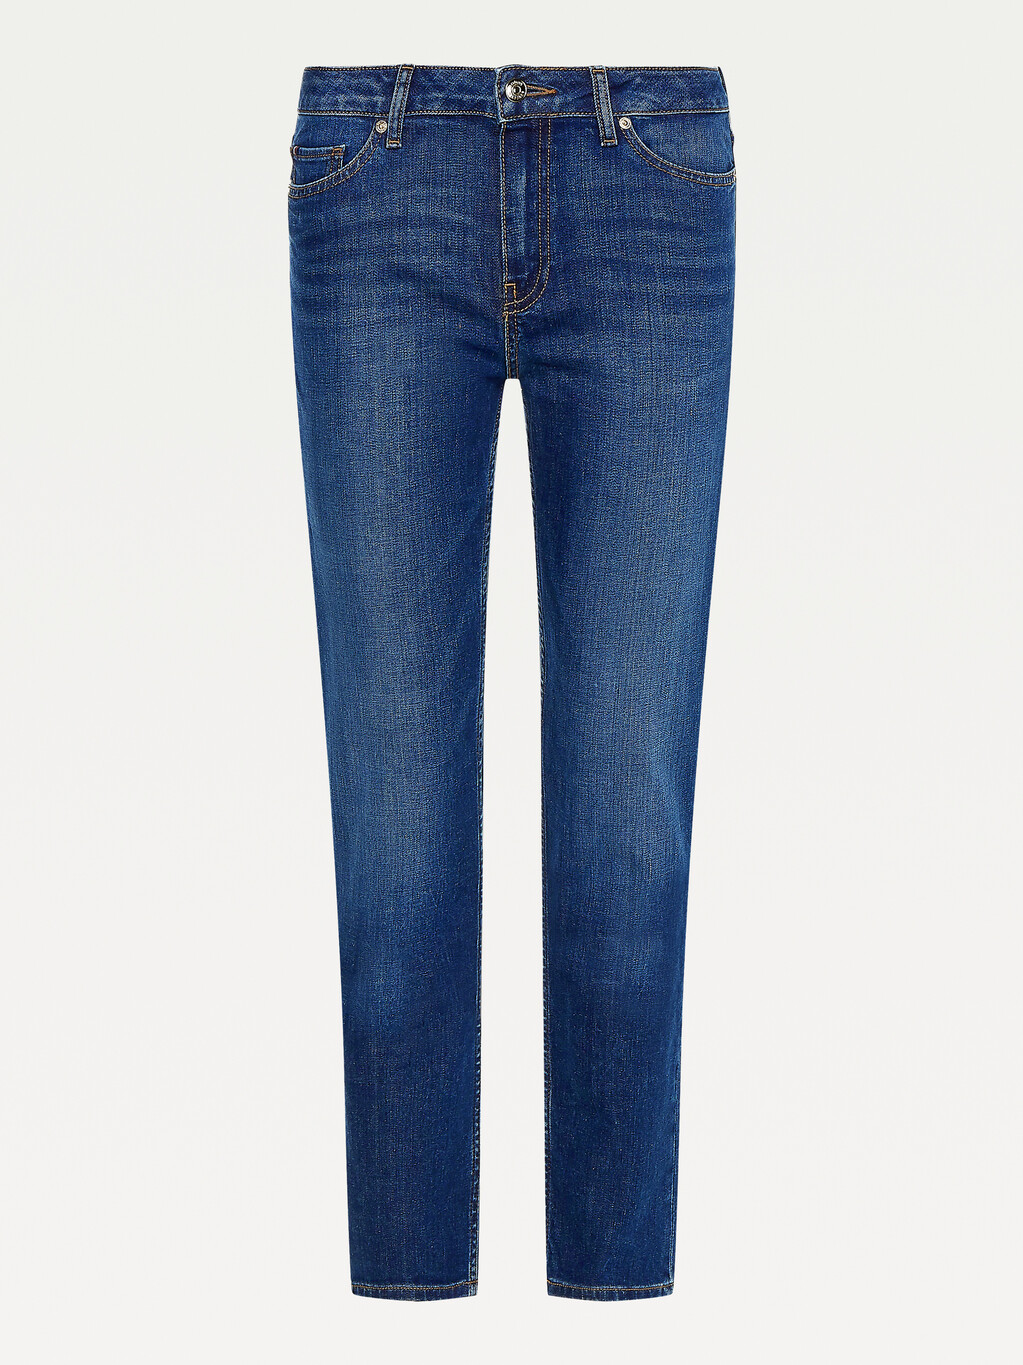 Rome Mid Rise Straight Faded Jeans